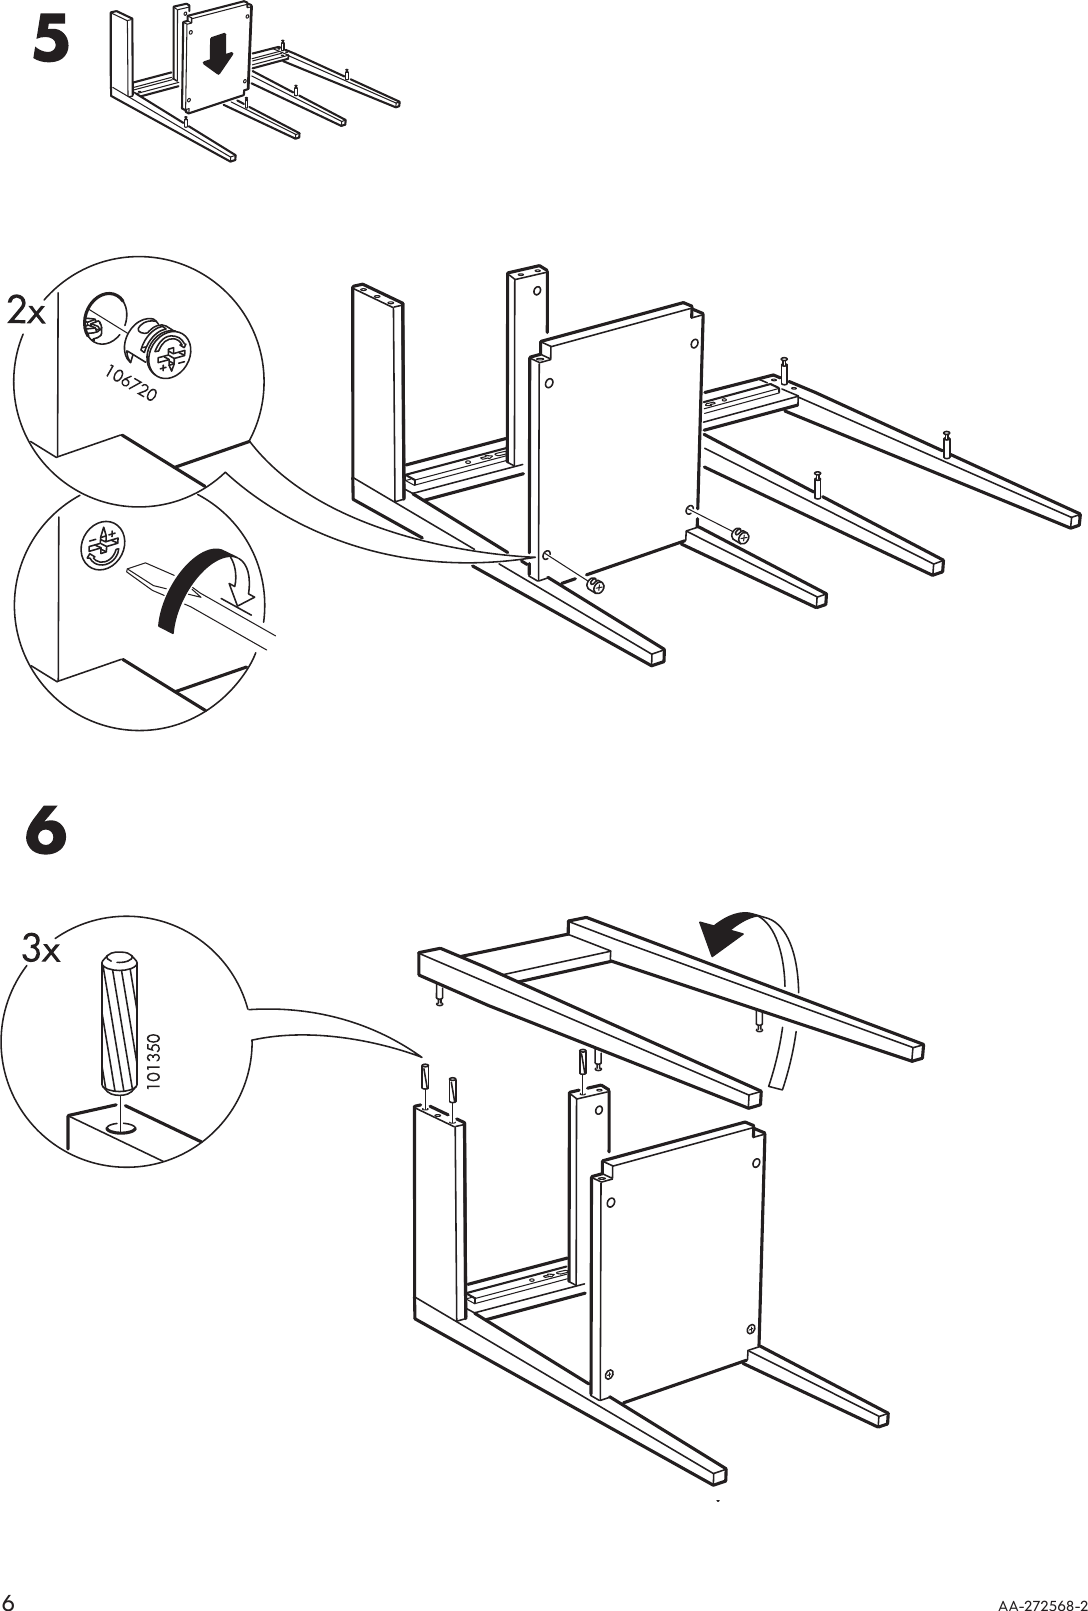 Page 6 of 12 - Ikea Ikea-Hemnes-Bedside-Table-18X14-Assembly-Instruction